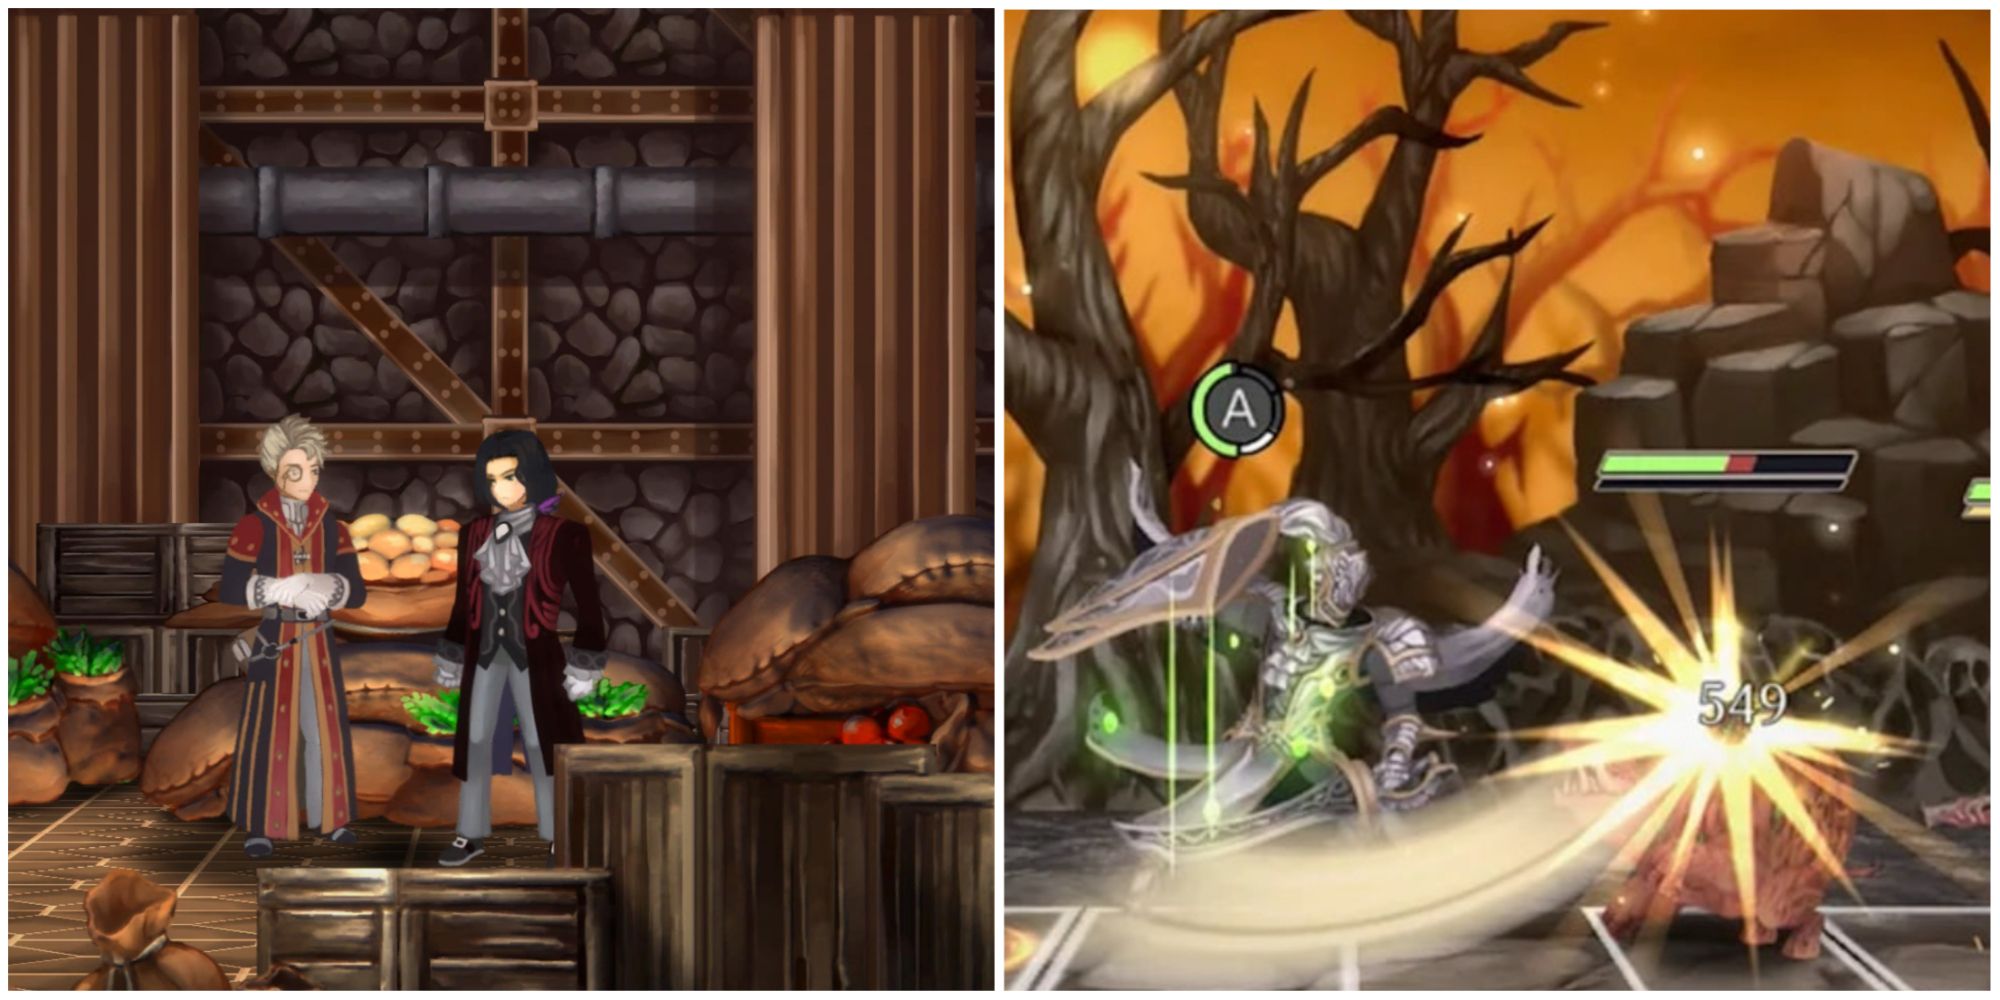 Fallen Legion Revenants collage - Lucien chatting in the kitchen, and an Exemplar slashing at an enemy in a dead forest